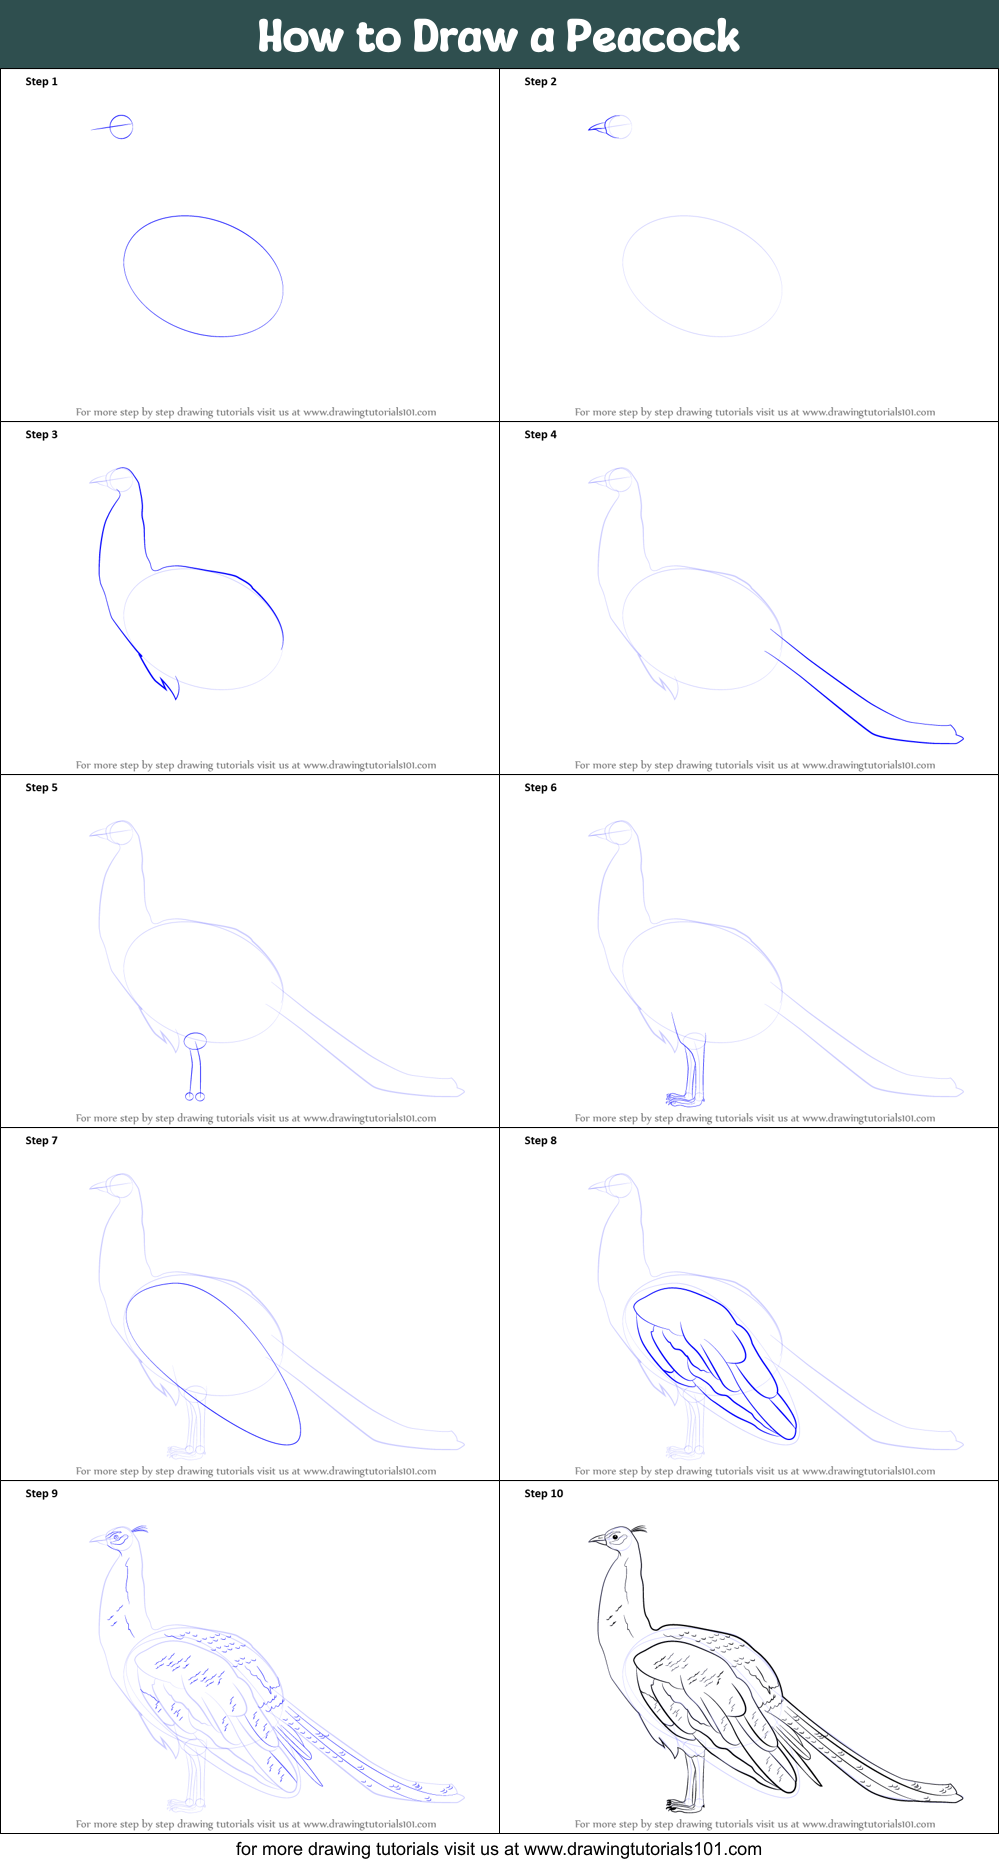 How to Draw a Peacock printable step by step drawing sheet